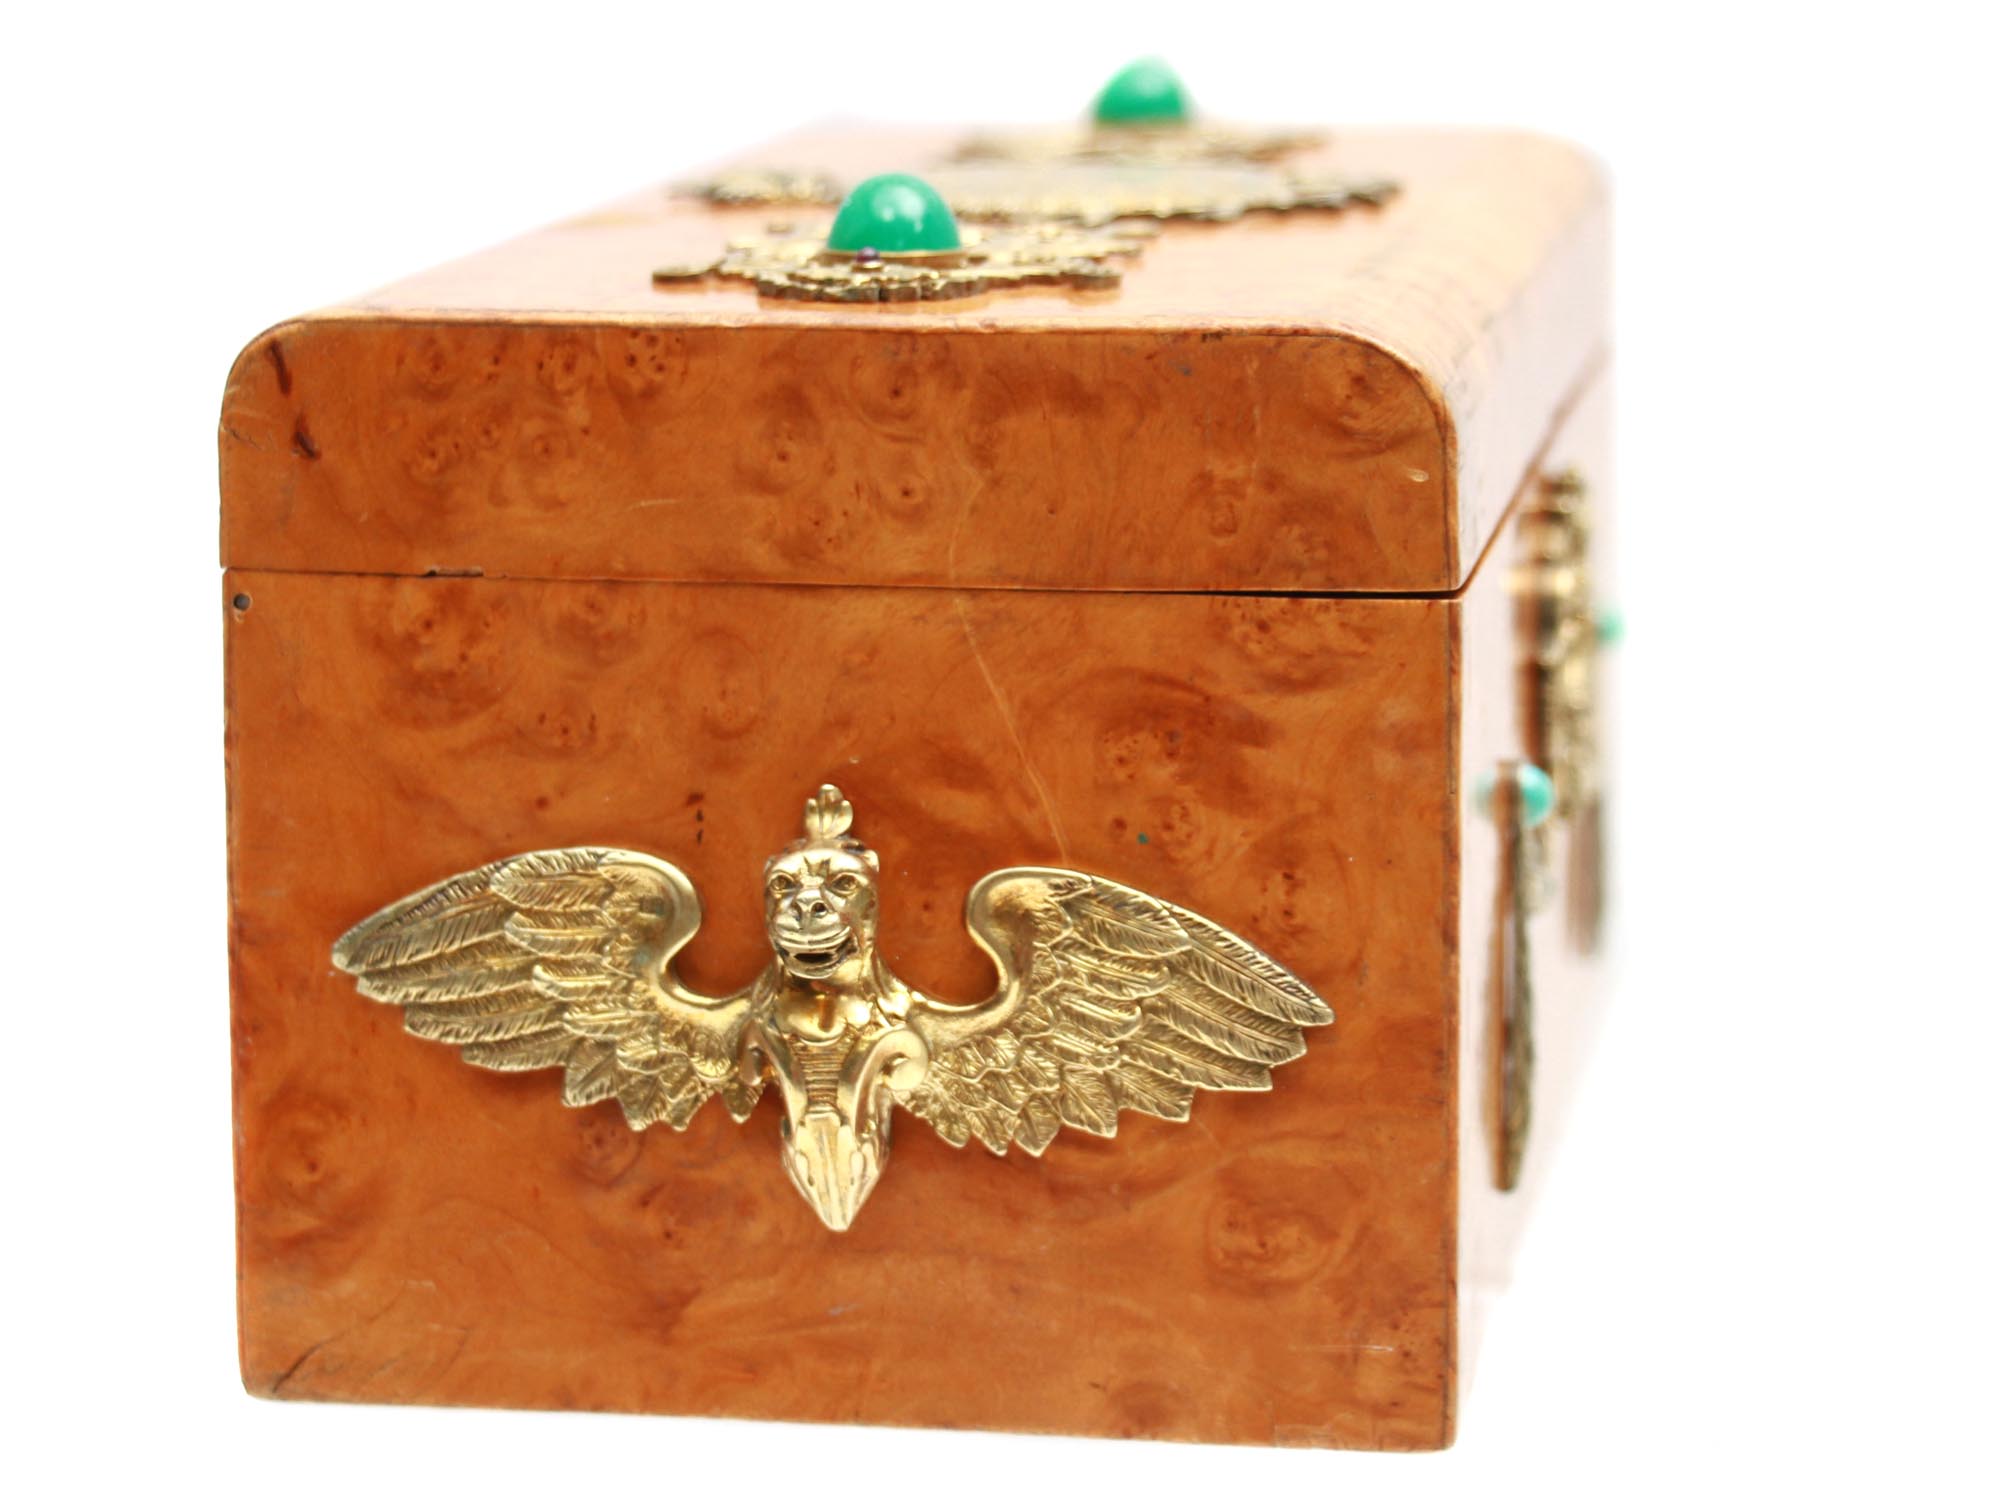 RUSSIAN KARELIAN BIRCH BOX WITH SILVER AND STONES PIC-4